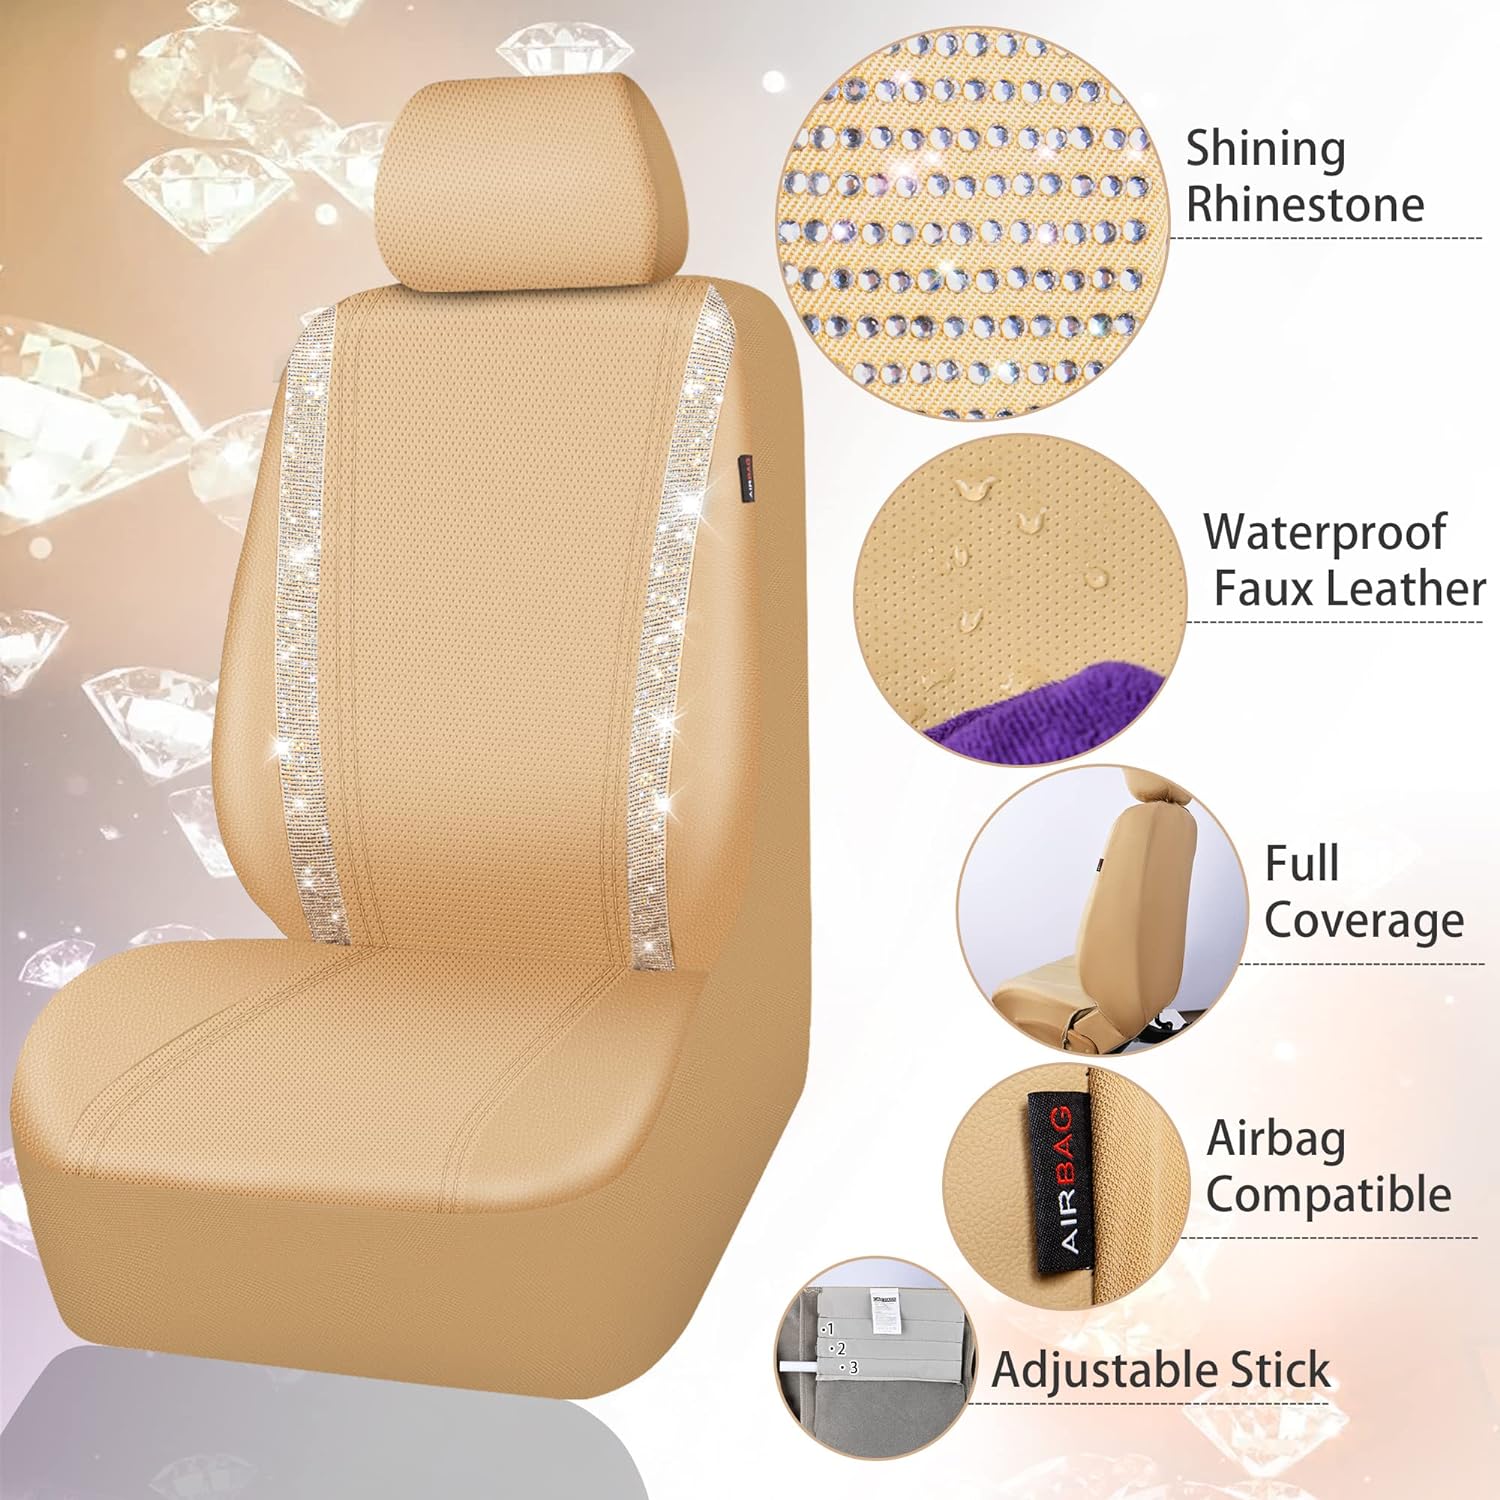 CAR PASS Leather Diamond Bling Car Seat Cover 2 Front Interior Sets, Waterproof Universal Shining Glitter Crystal Sparkle Fit for 95% Automotive Truck SUV Cute Women Girl, Black Silver Rhinestone